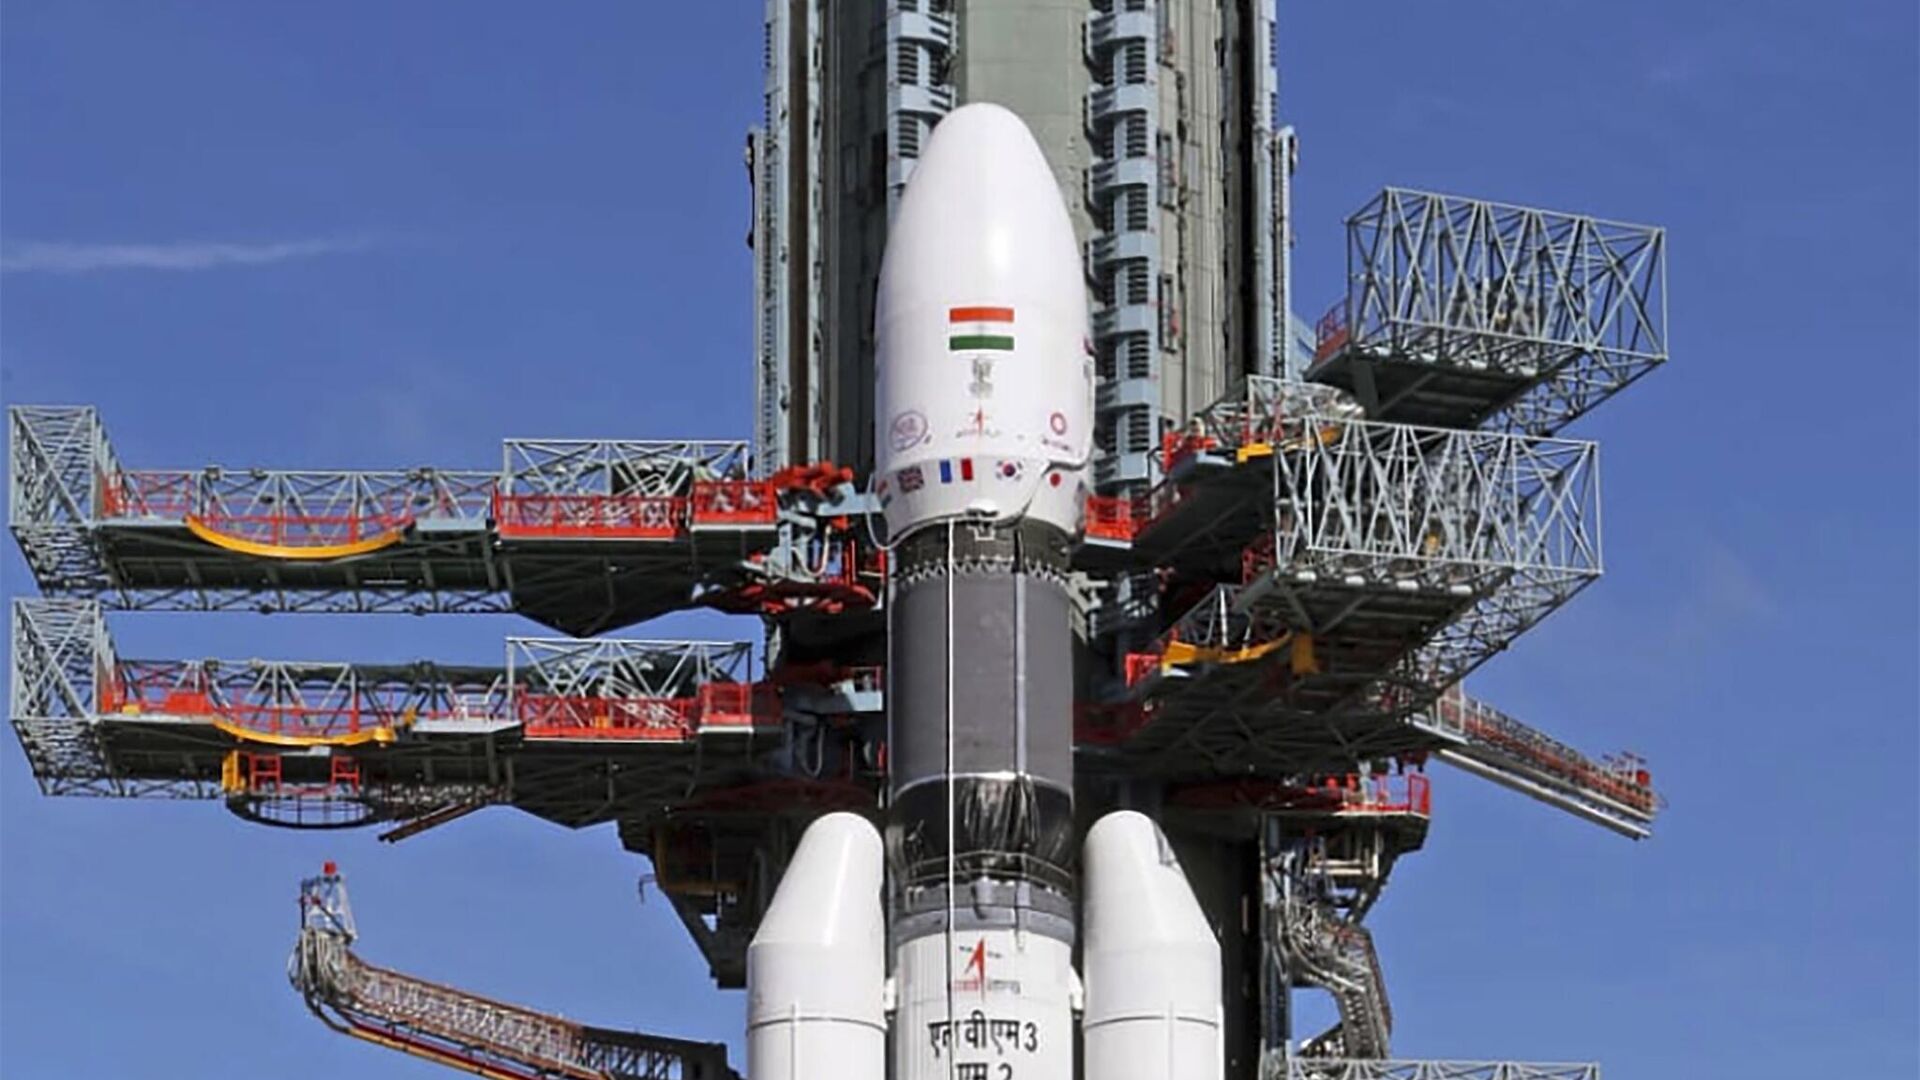 This photograph released by the Indian Space Research Organization (ISRO) shows India's heaviest rocket prepared ahead of the launch from the Satish Dhawan Space Center in Sriharikota, India, Saturday, Oct. 15, 2022. - Sputnik International, 1920, 26.03.2023